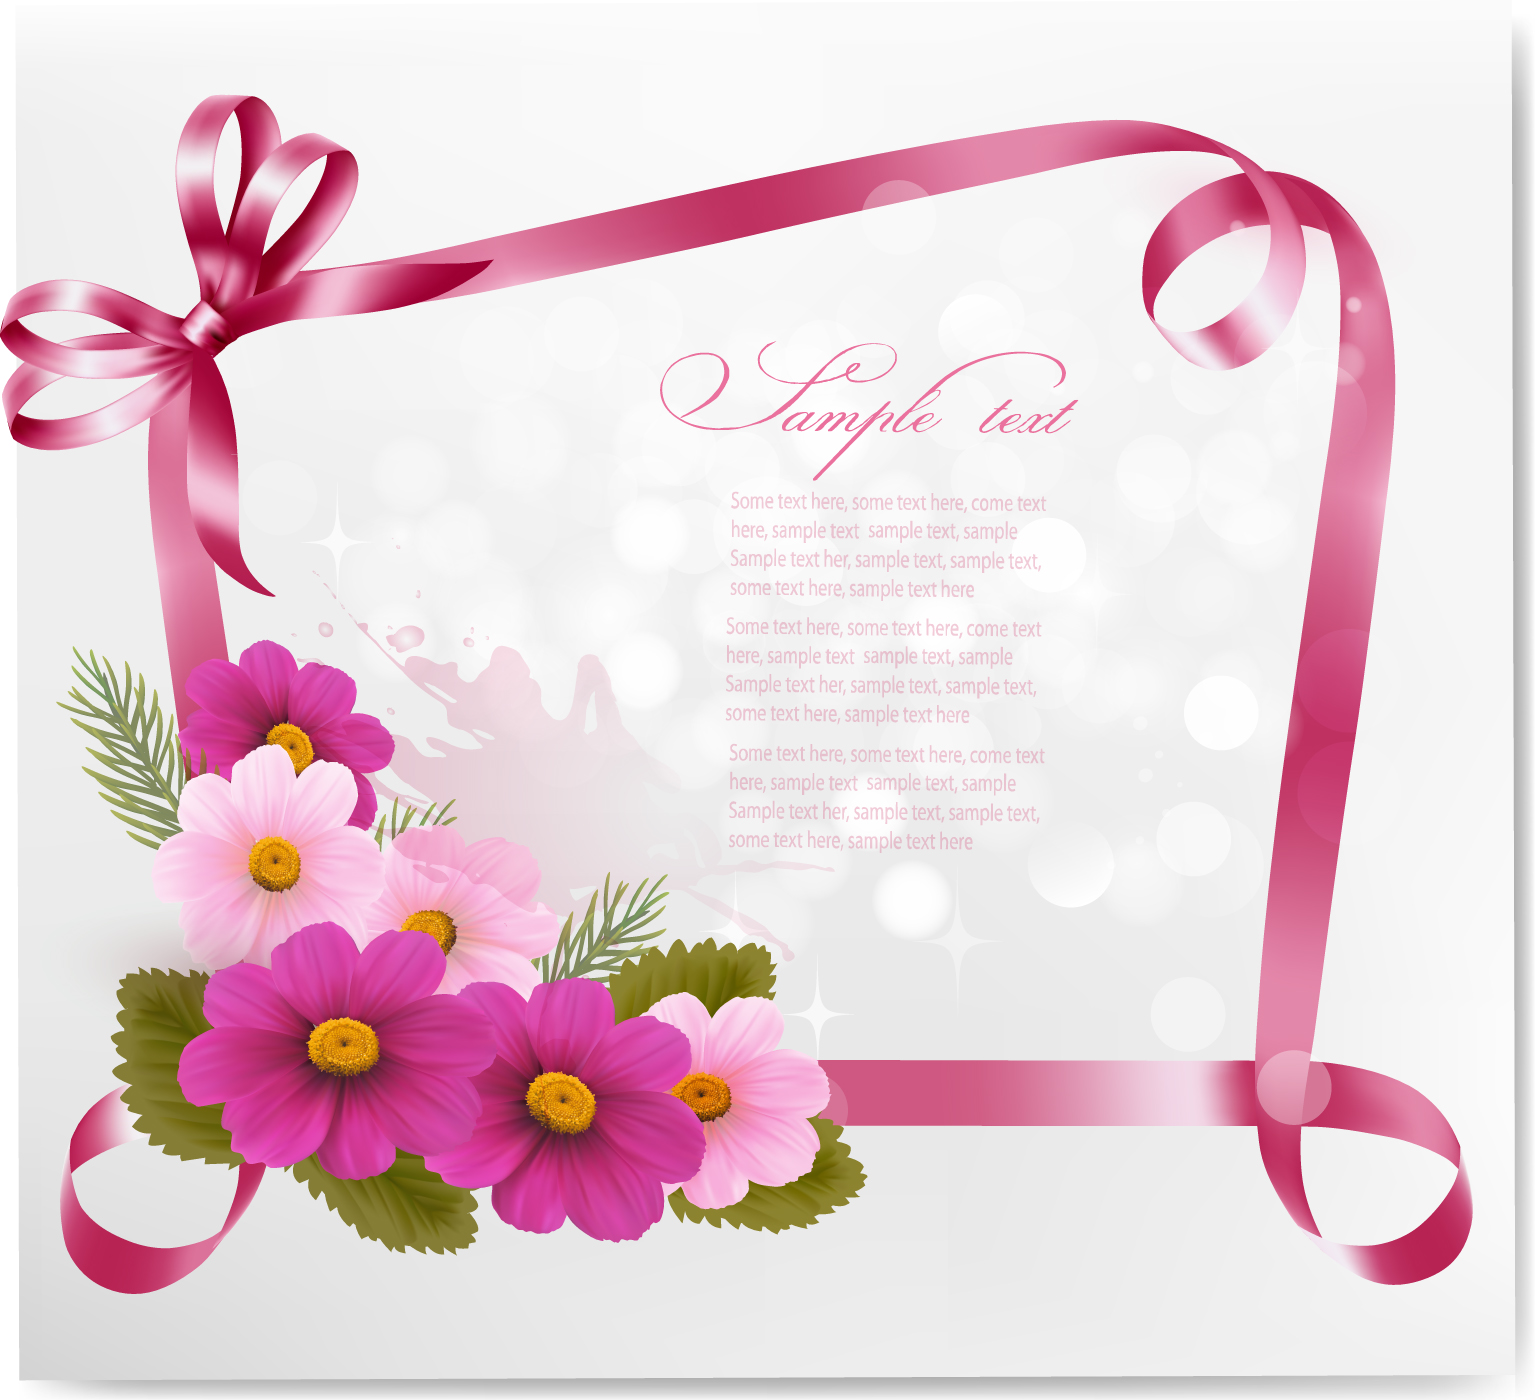 ribbon-with-flower-greeting-card-vector-02-free-download